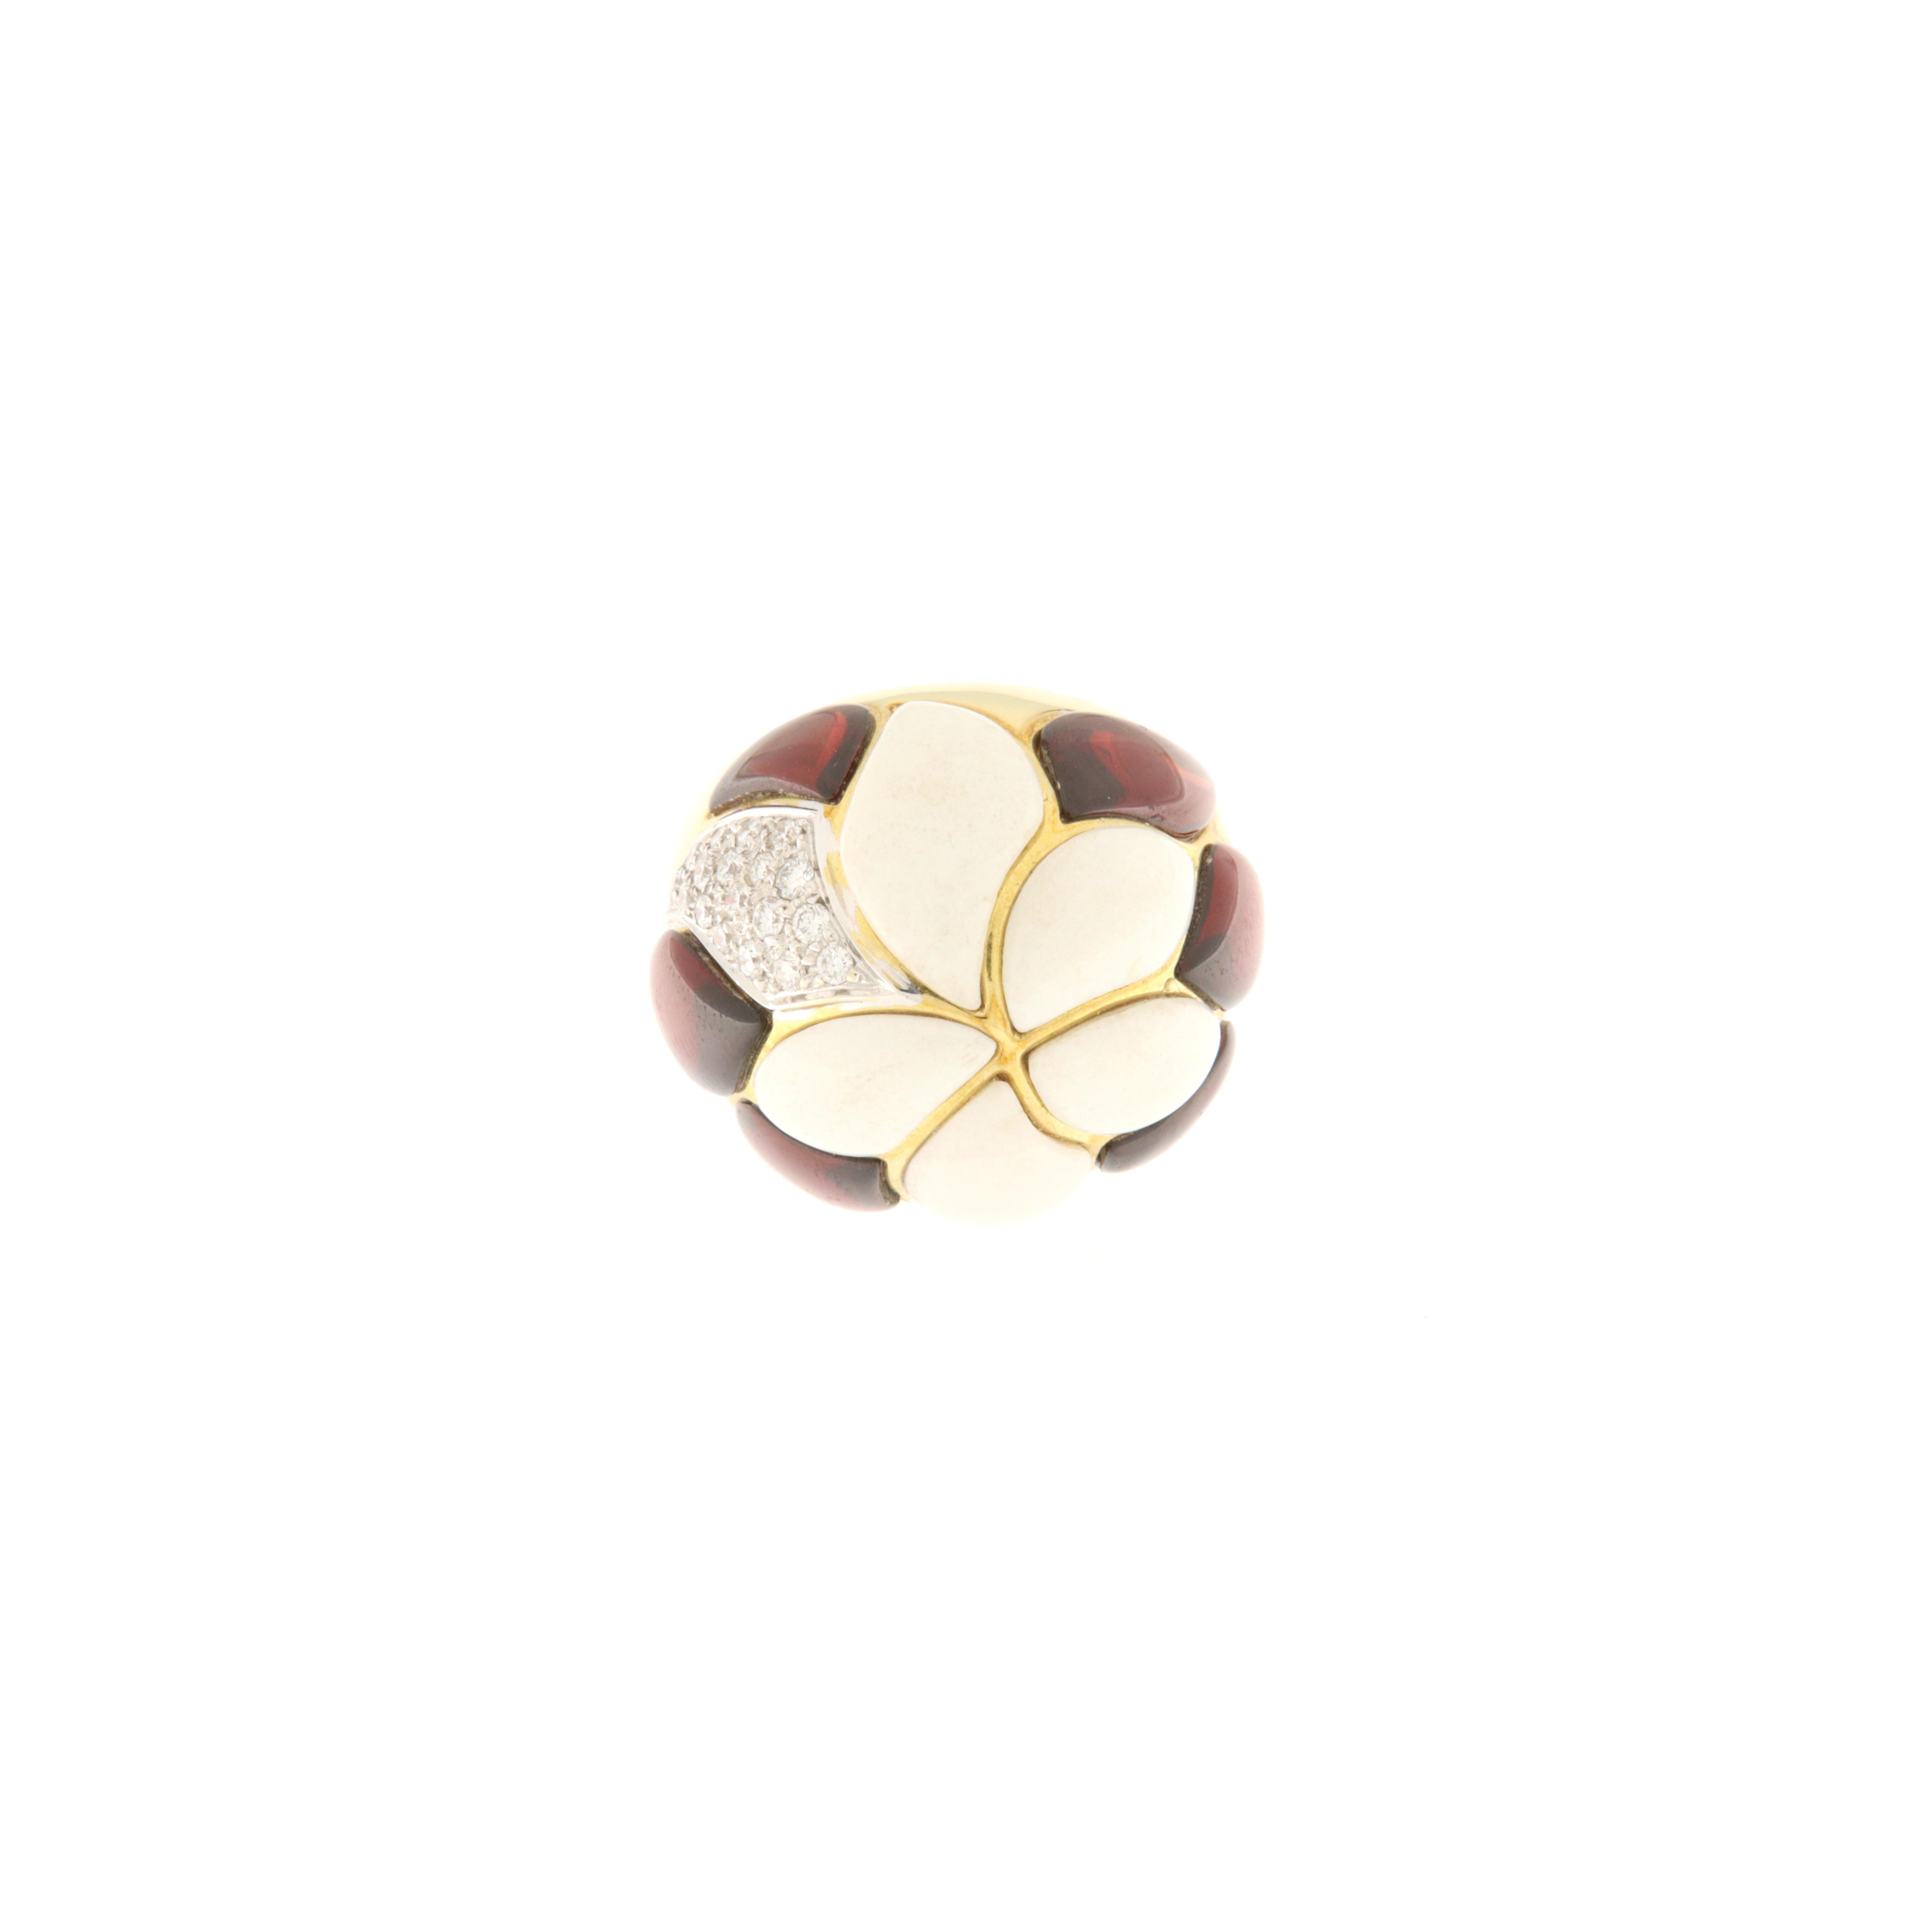 One-of-a-kind ring made of 18 kt gold, with petal decoration made of custom-cut elements of white coral and garnets set together with a single petal of brilliants (ct.0.32). The ring's distinctive design and plastic structure make it a work of fine